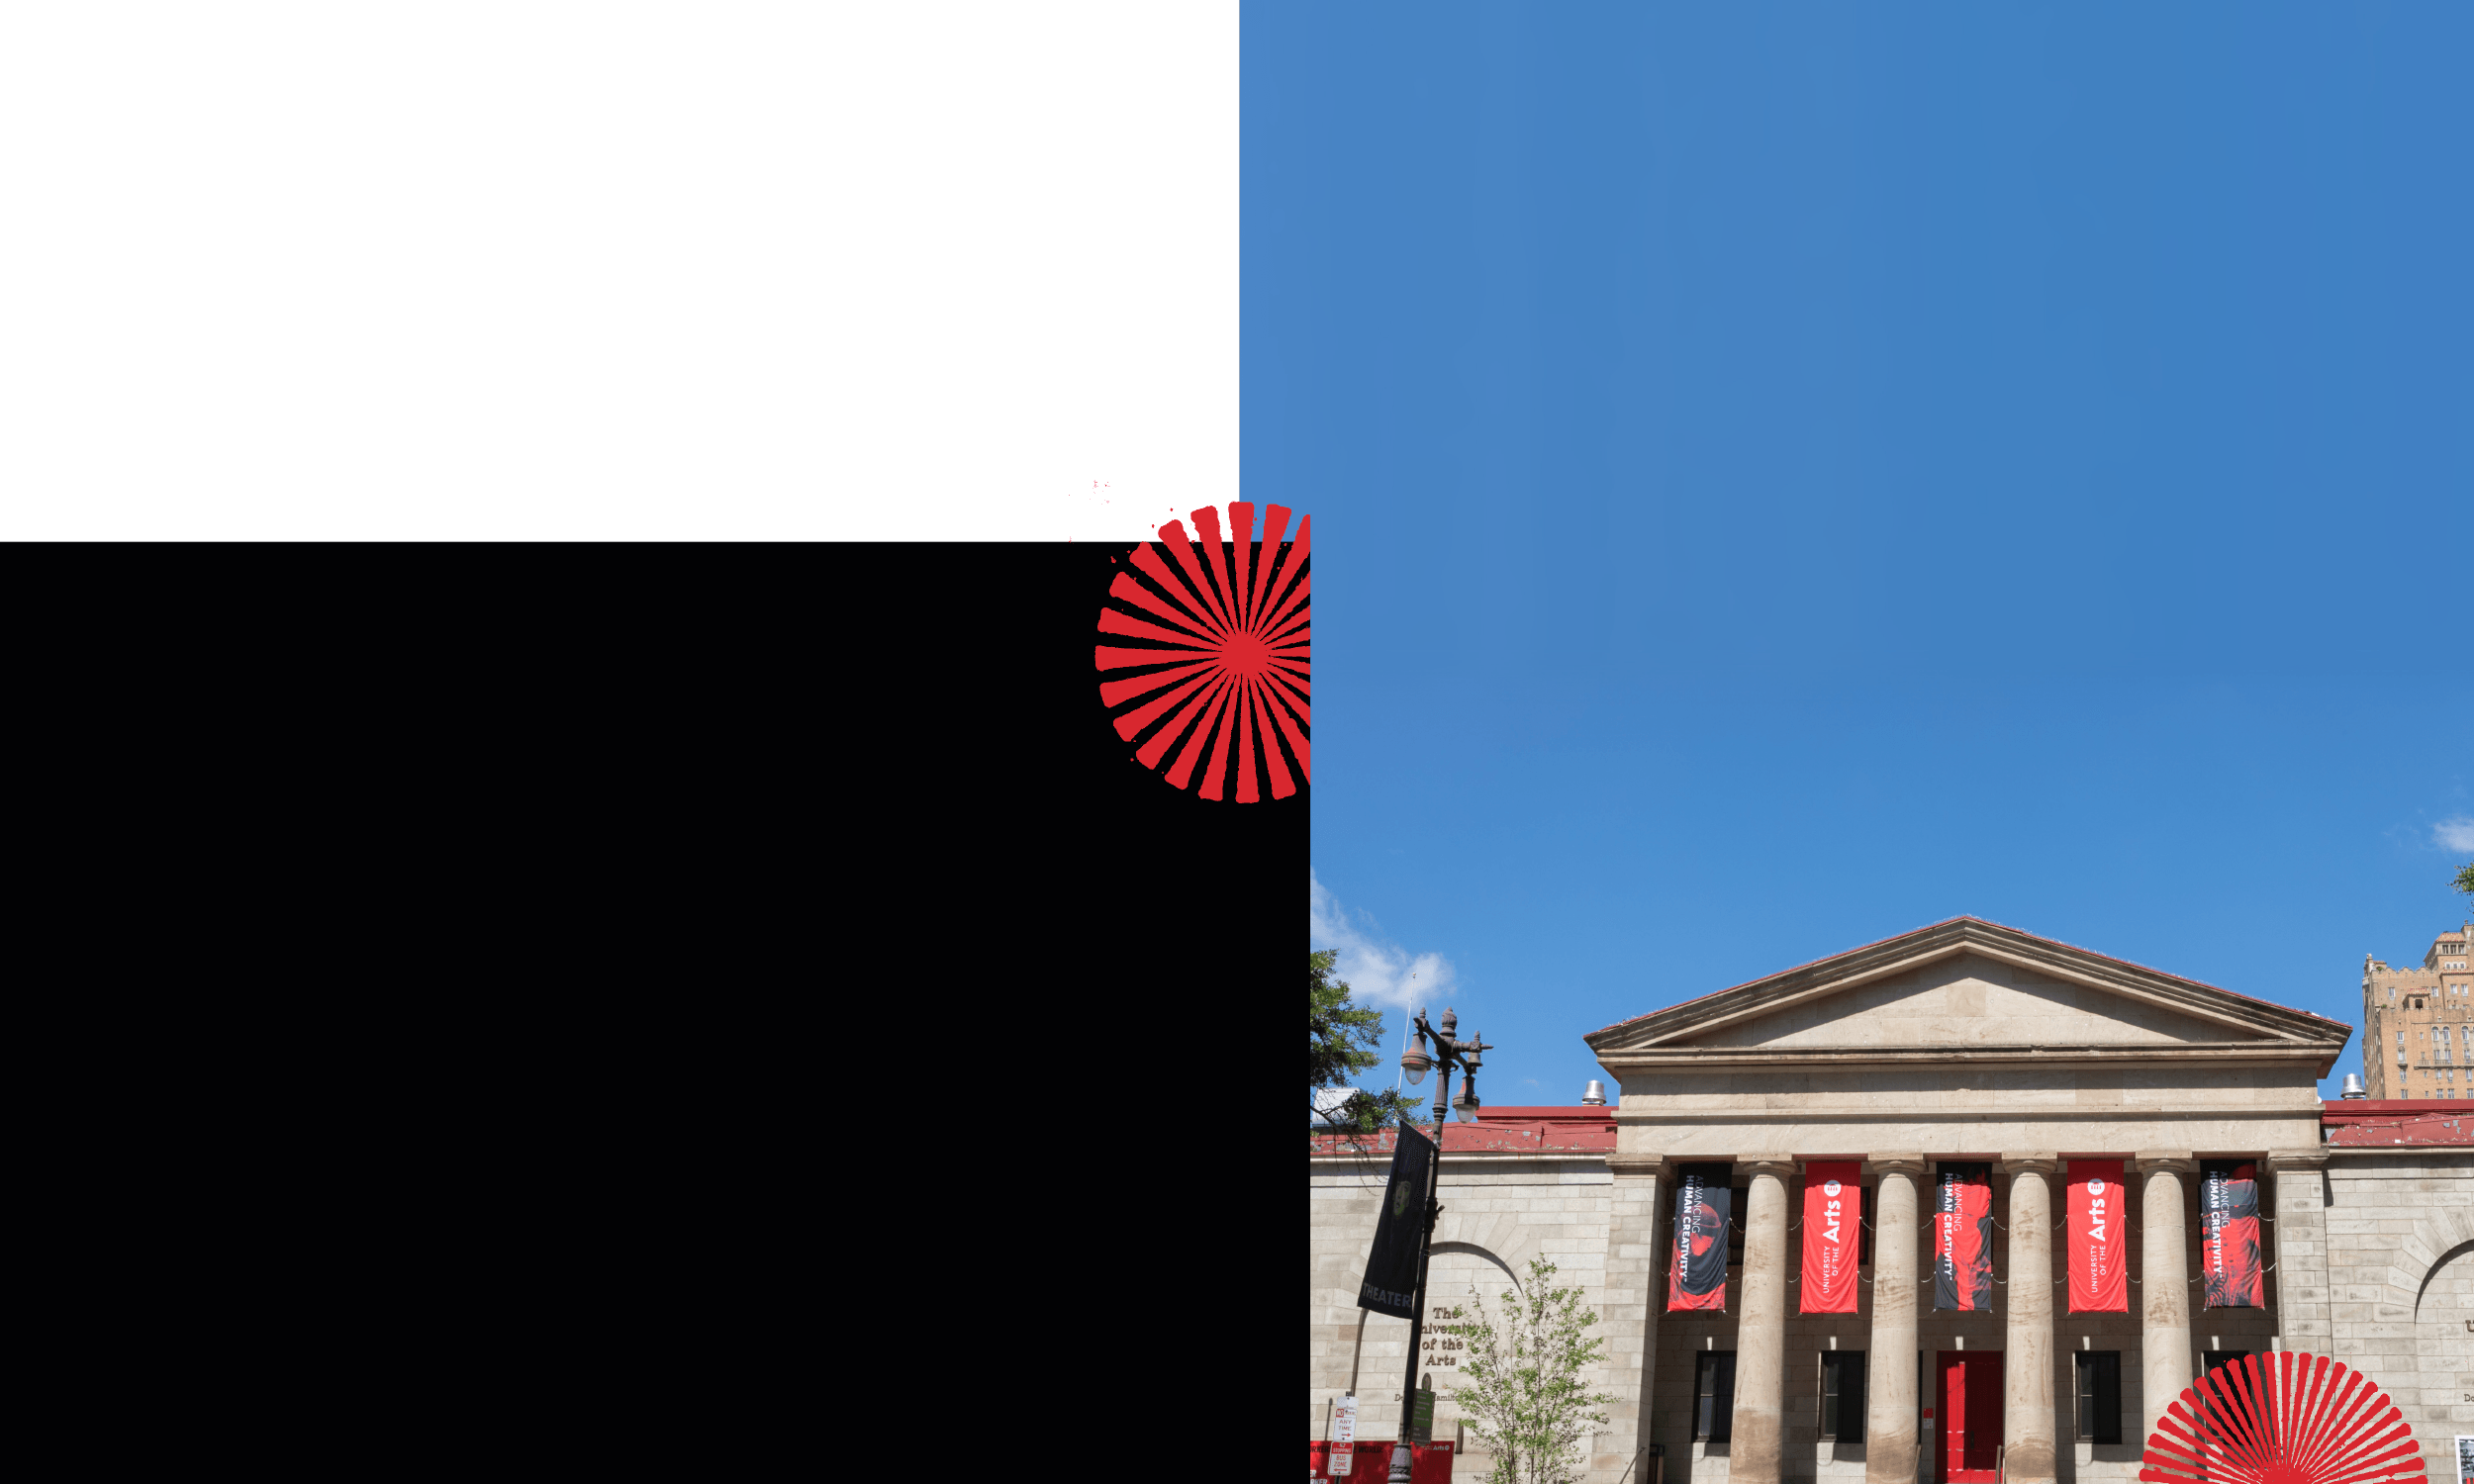 A graphic image of Hamilton Hall with a clear blue sky next to black and white graphic boxes with a red spiral-like element